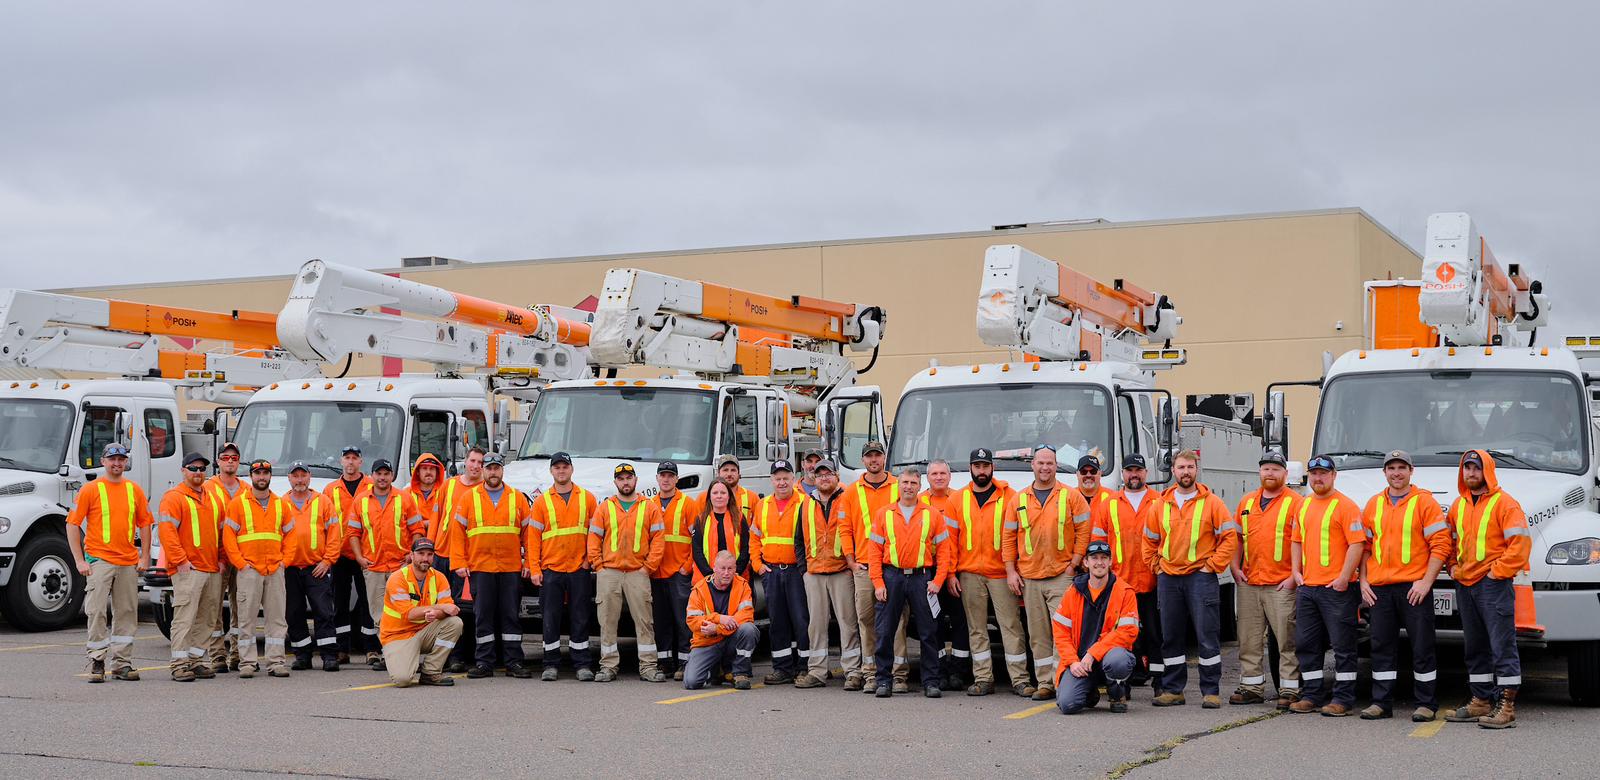 photo of the 30-person crew that travelled to Nova Scotia to assist with power restoration efforts on September 27, 2022